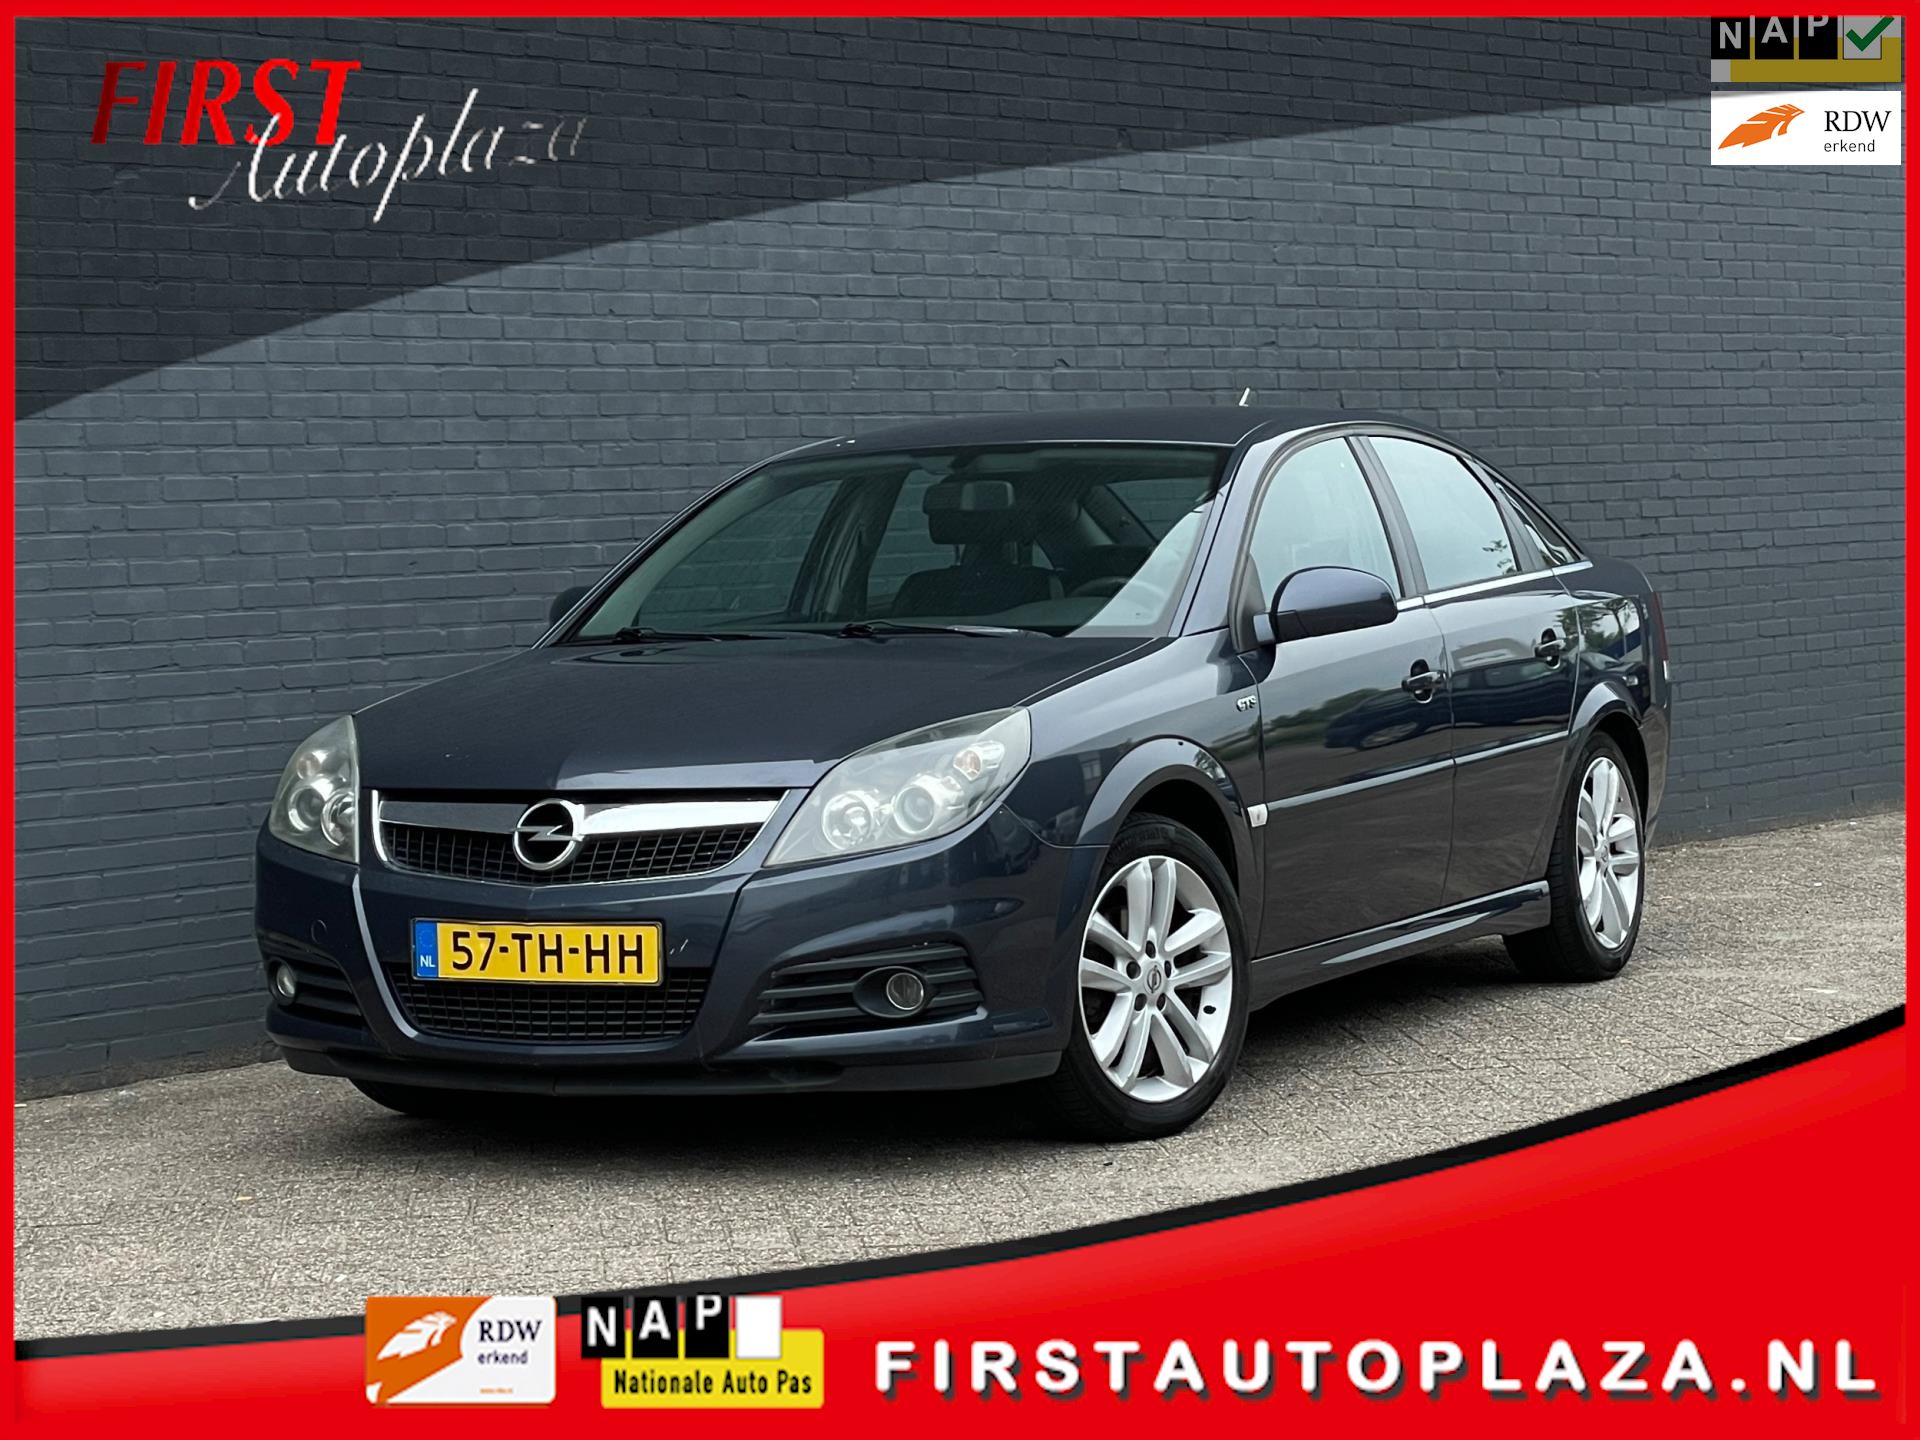 Opel Vectra GTS occasion - FIRST Autoplaza B.V.